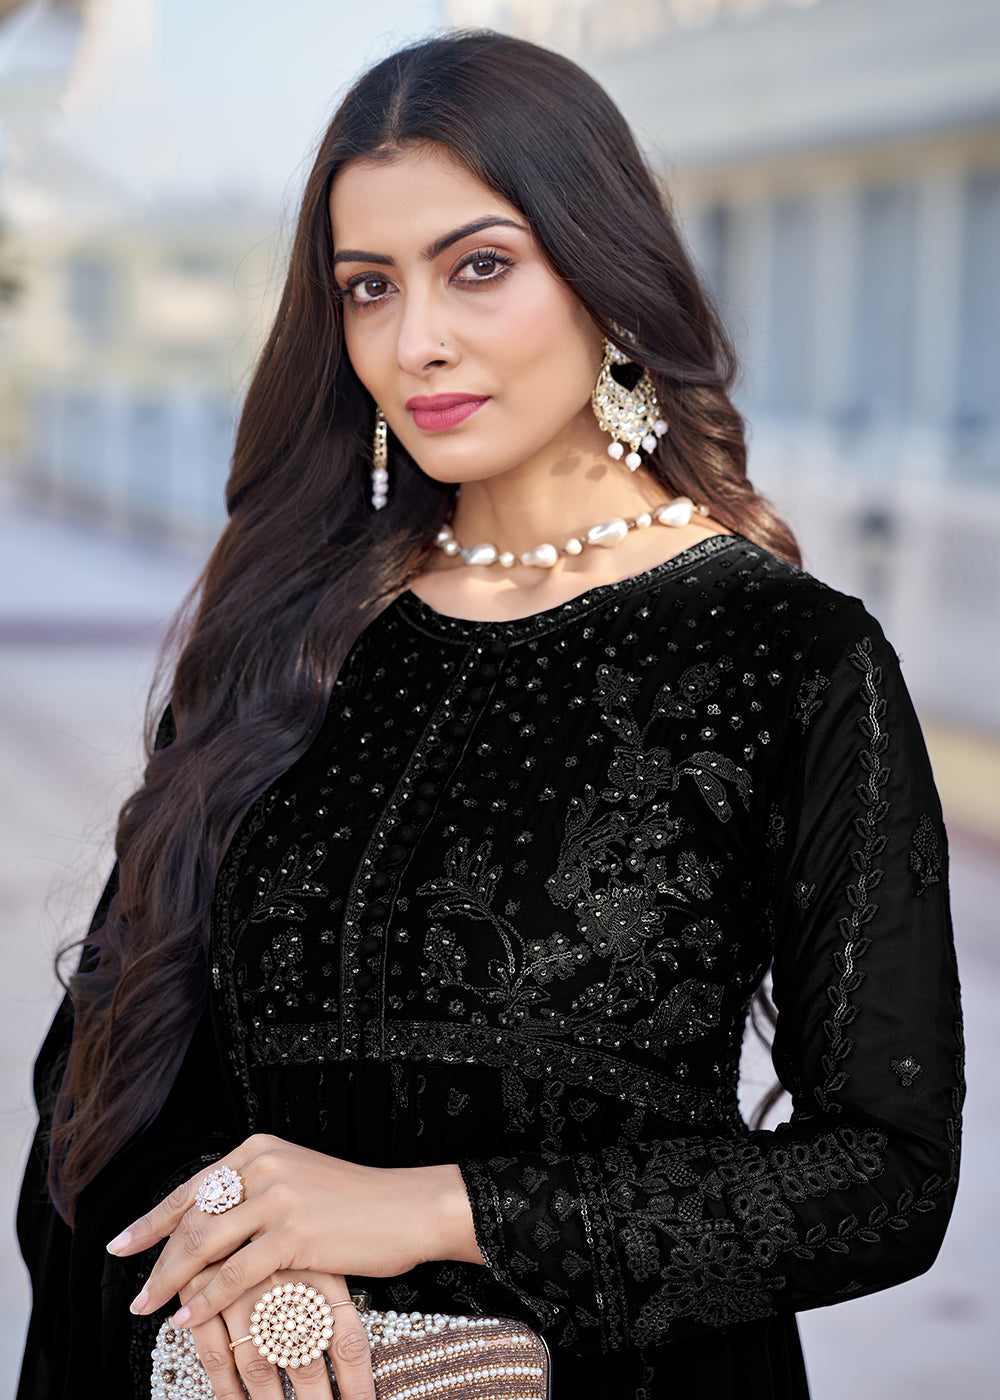 Buy Now Black Georgette Embroidered Frock Style Salwar Suit Online in USA, UK, Canada, Germany, Australia & Worldwide at Empress Clothing. 